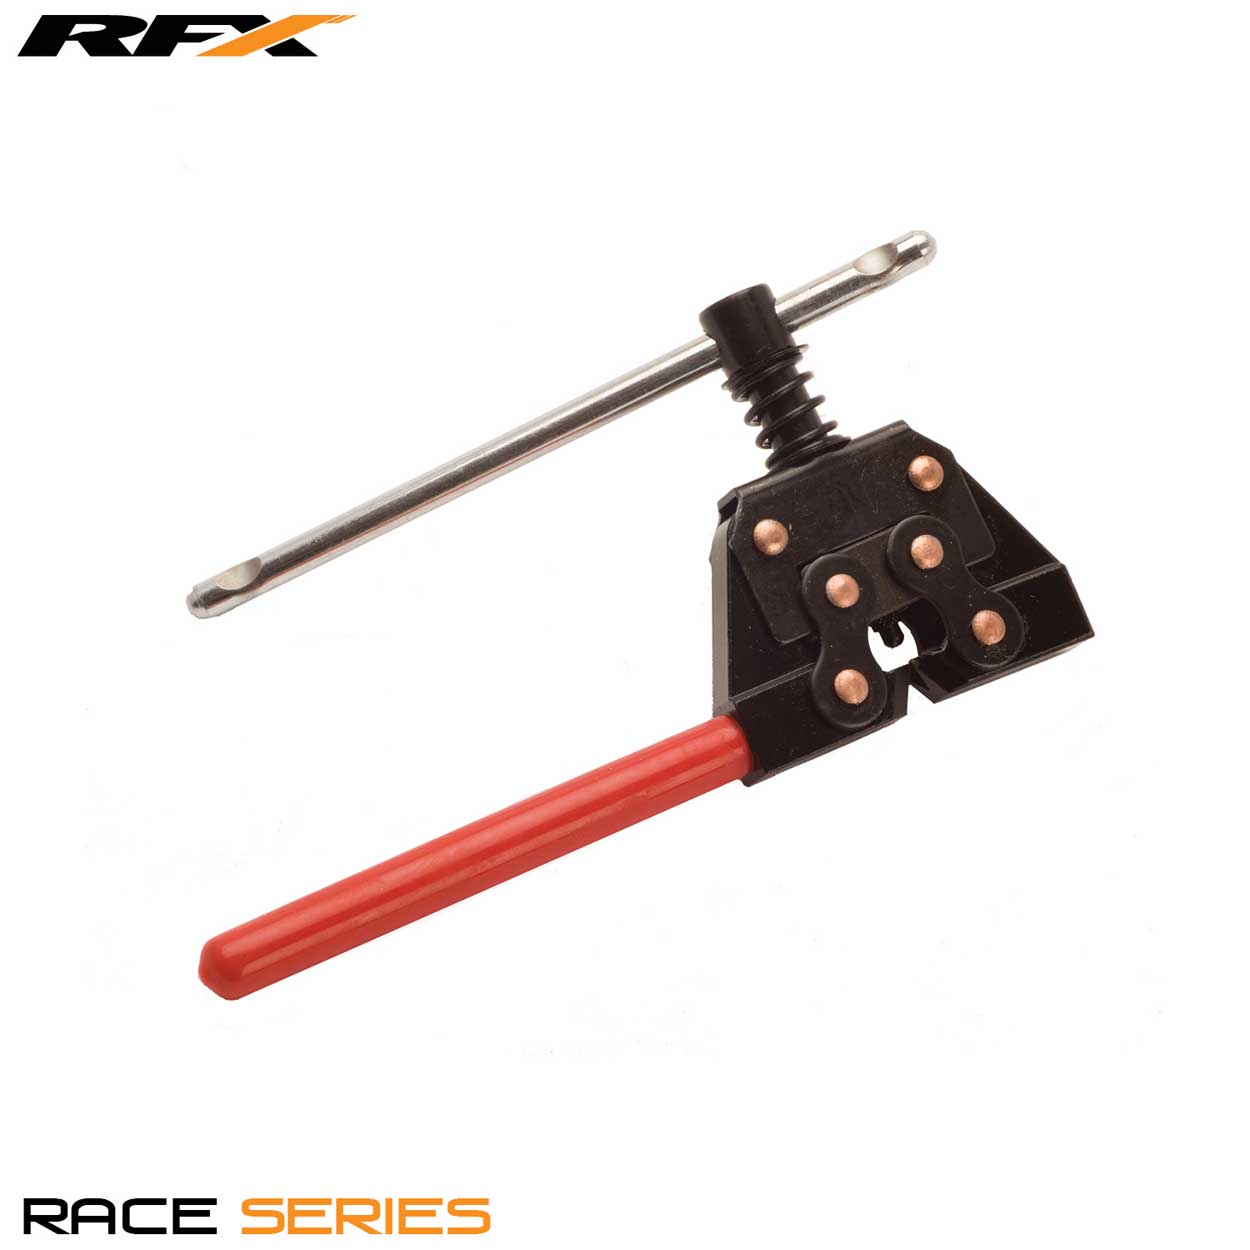 RFX Race Chain Breaker Standard (Black/Red) Universal for use with 415-520 chains - Silver - RFX